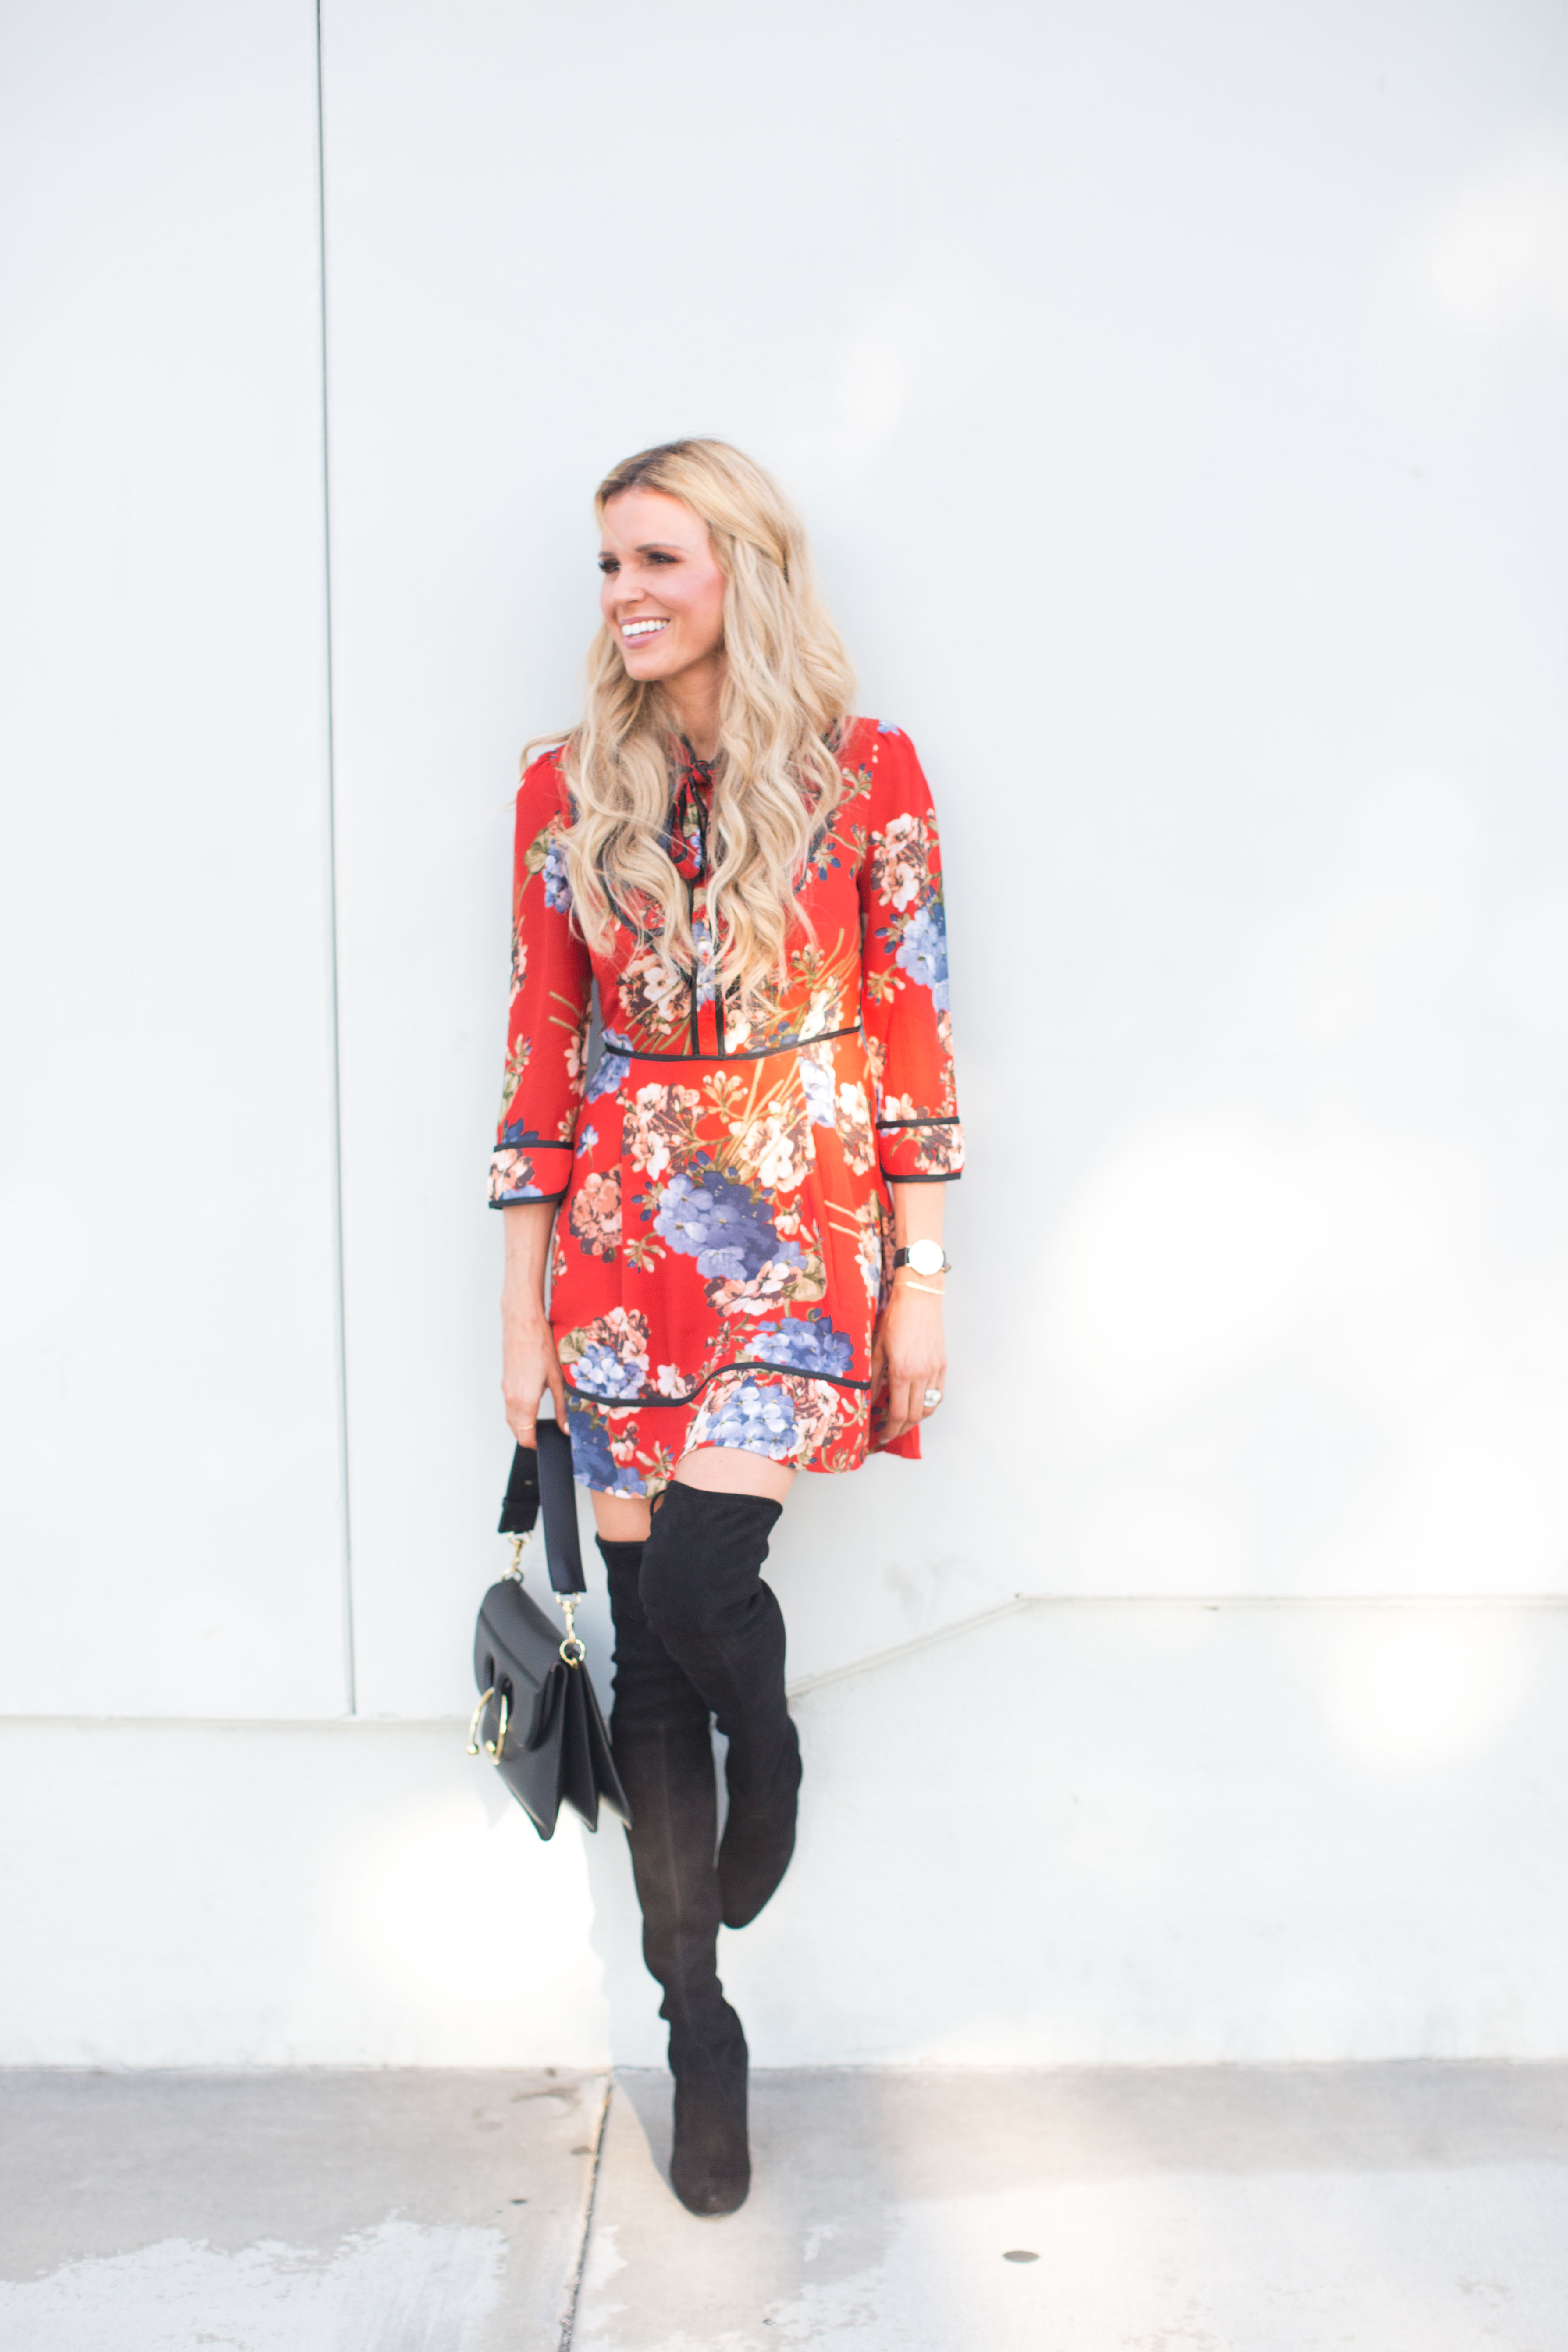 Floral Dress Over Knee Boots